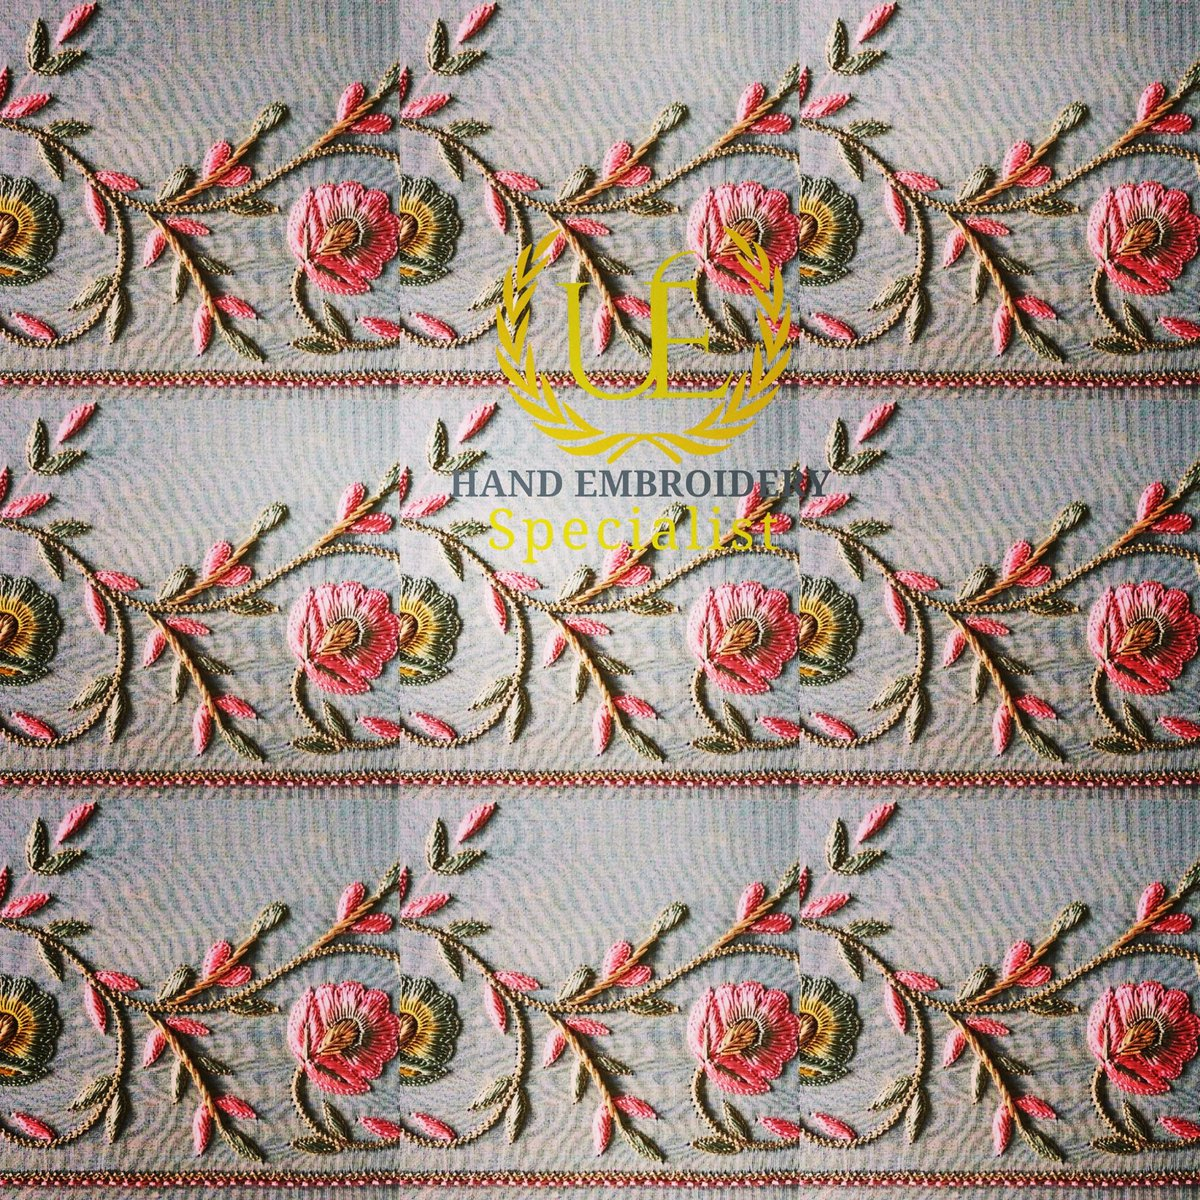 Hand Embroidery Patterns For Tablecloth Hand Embroidery Specialist Embroideryspec